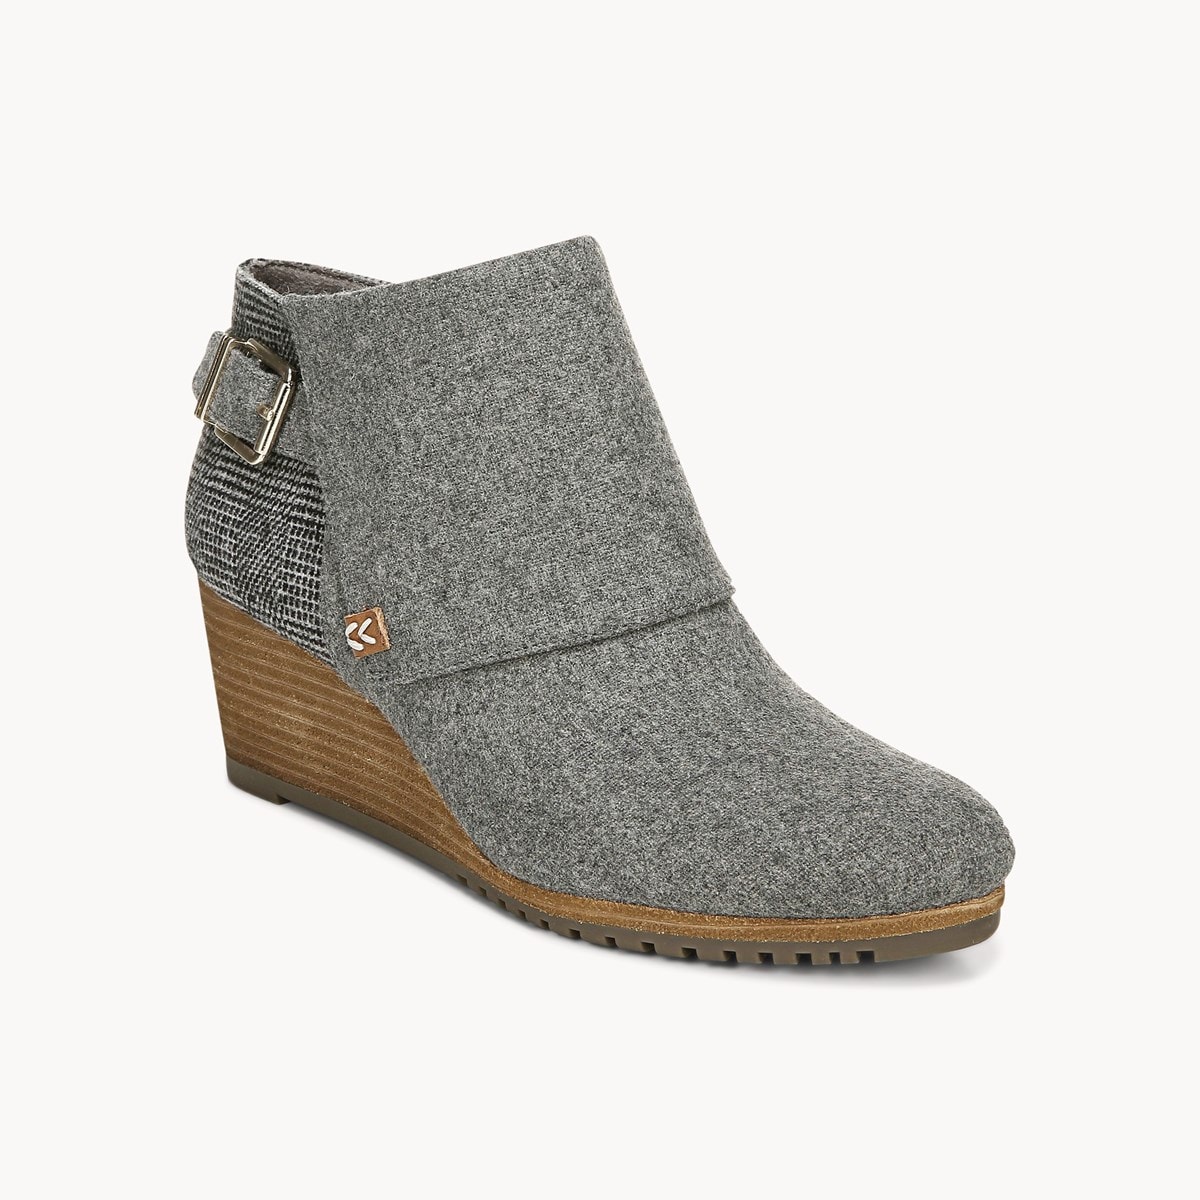 American Lifestyle Create Wedge Bootie 